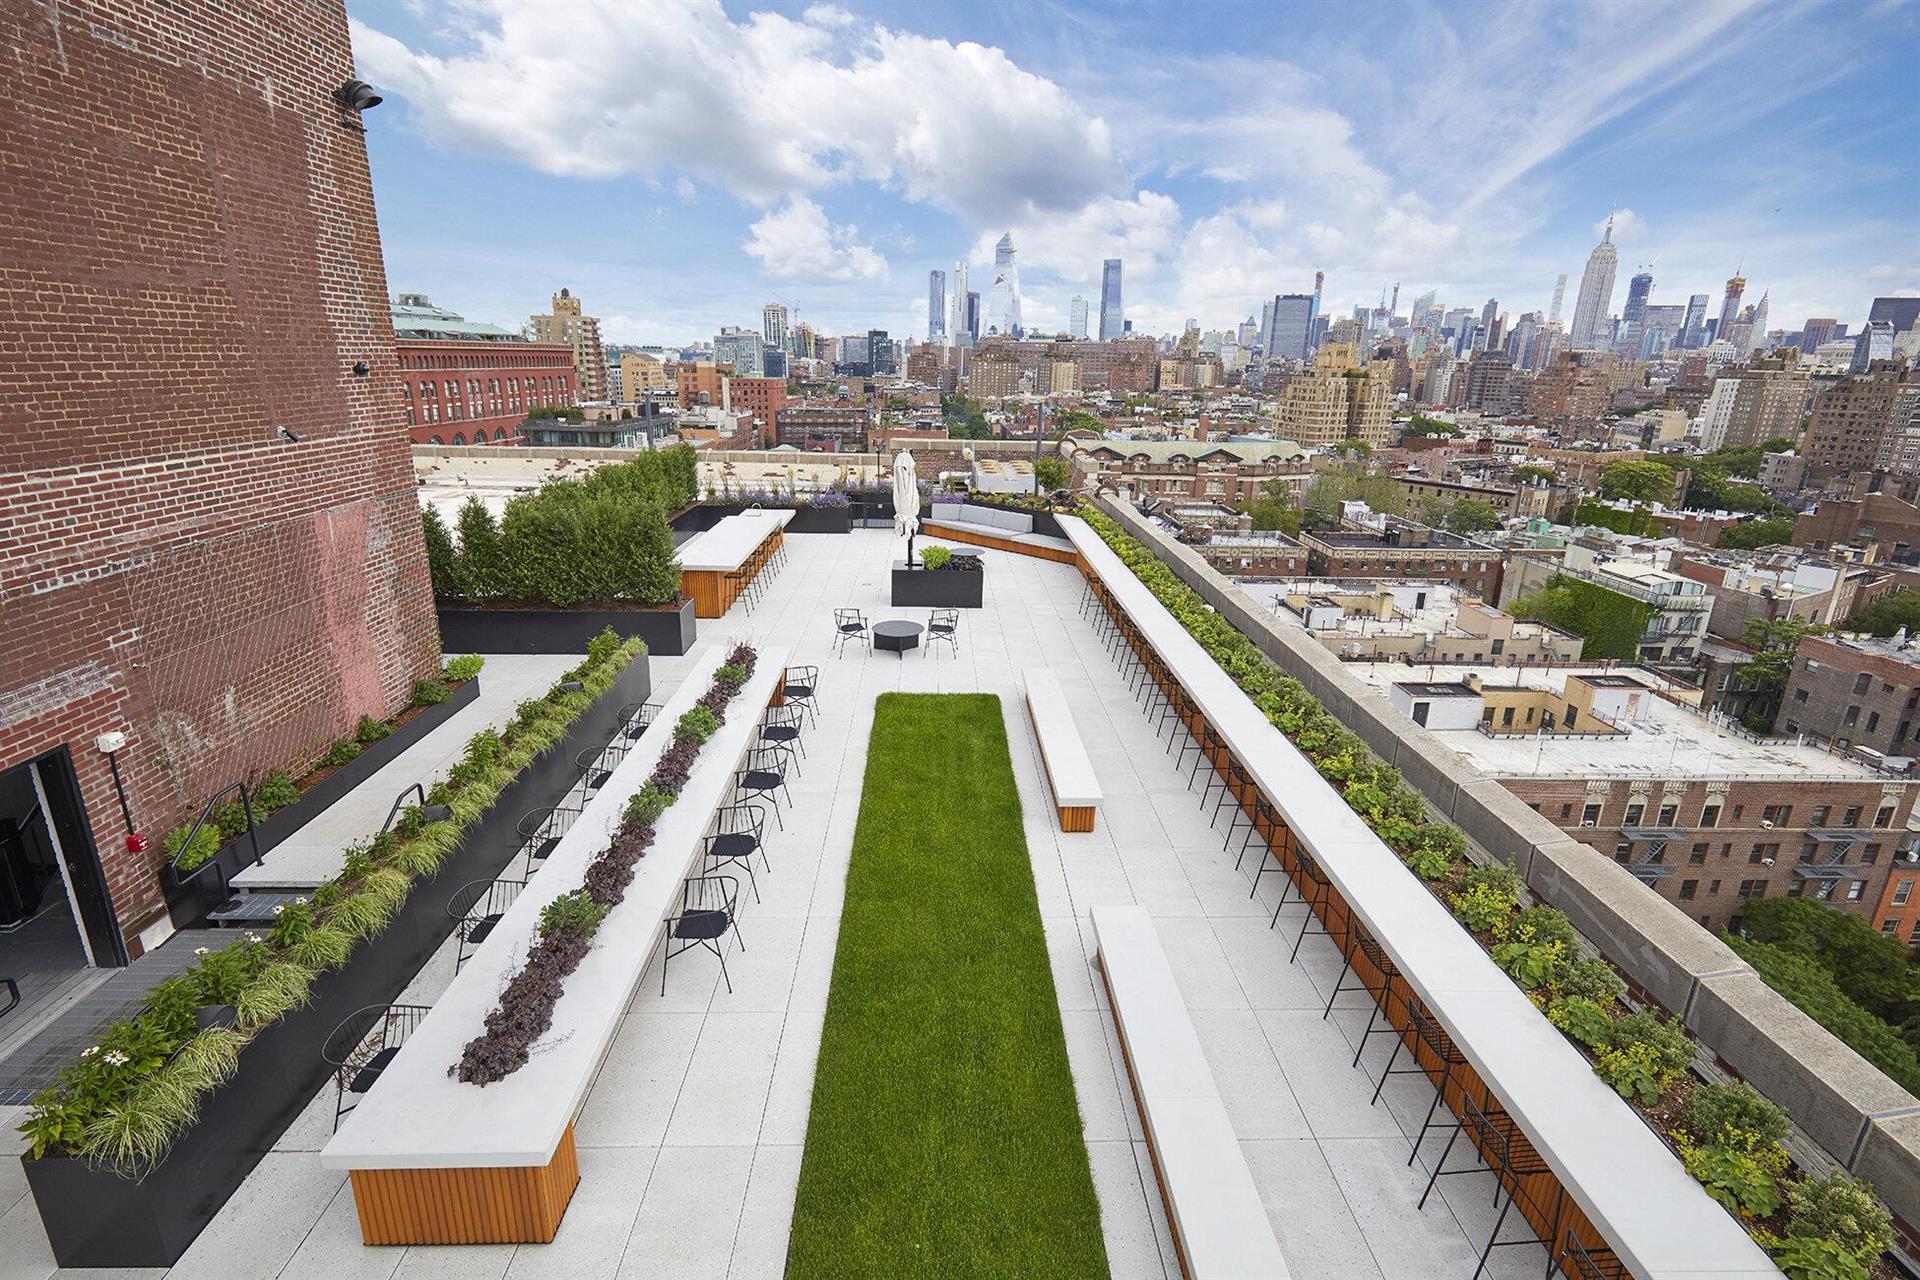 435 Hudson Street - Rooftop in New York, NY